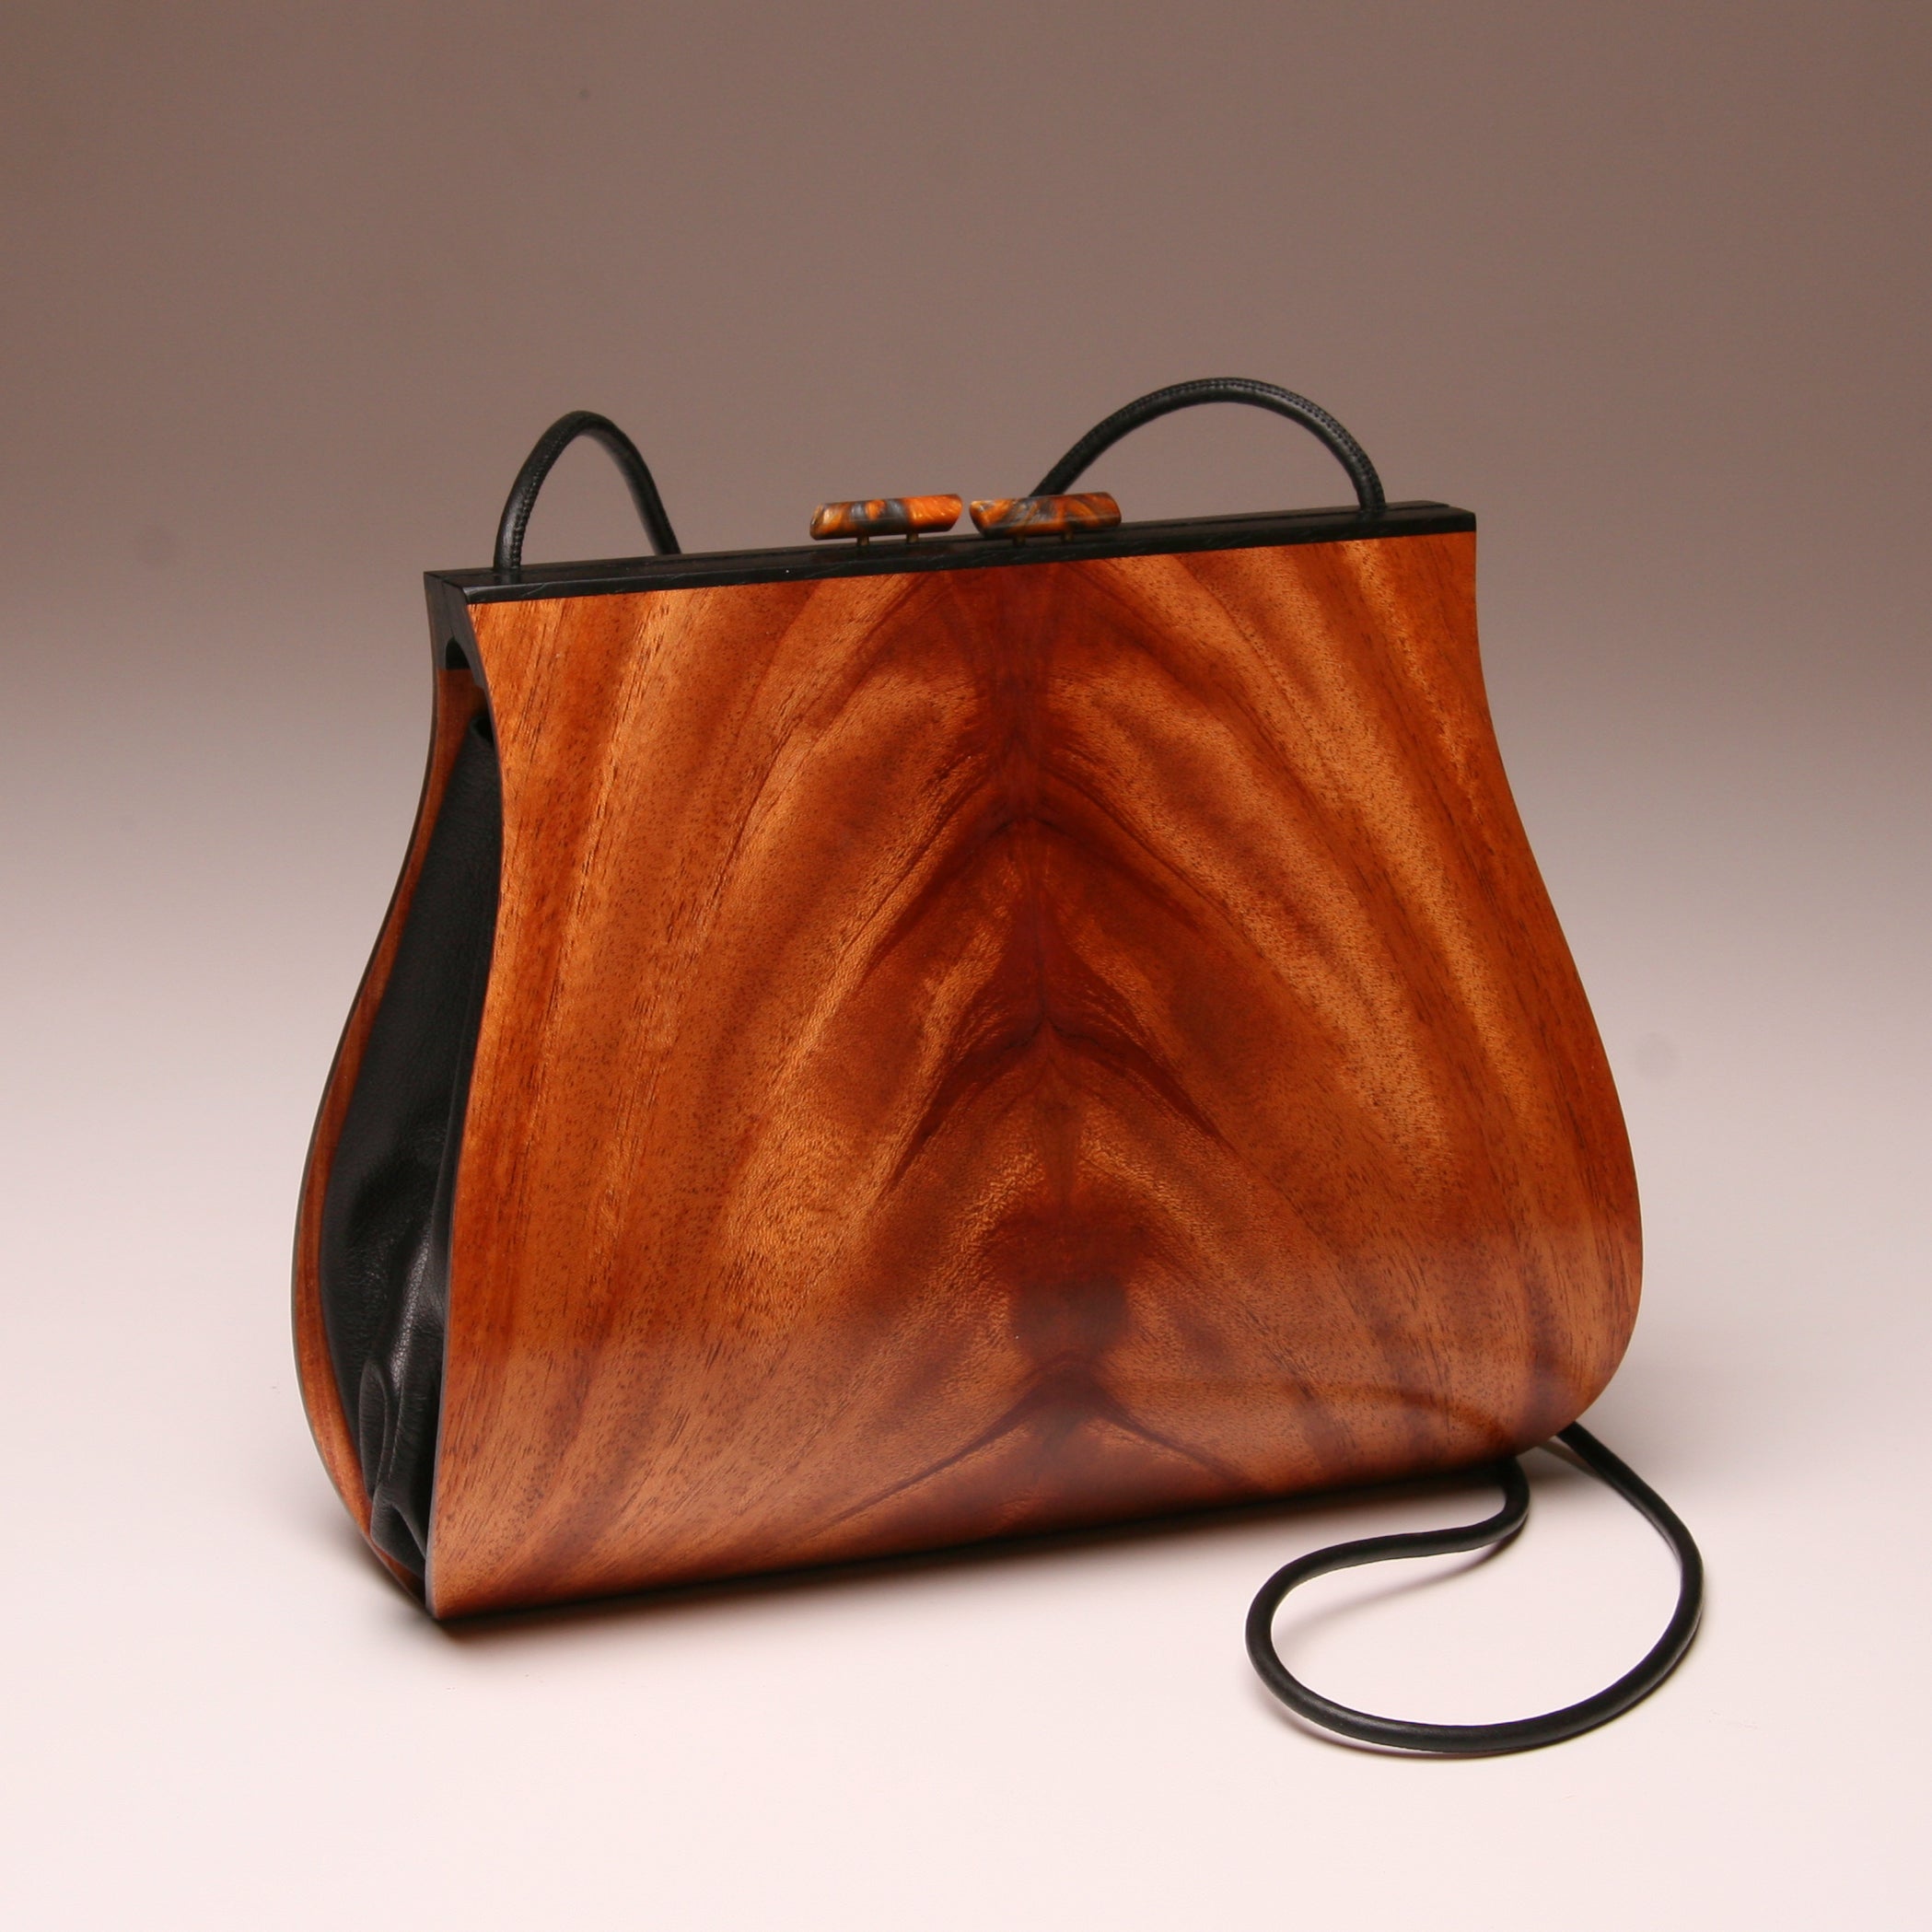 "Dianella" Large Handbag-Single Strap - Book-Matched Mahogany Crotch (Only 1 in stock!)